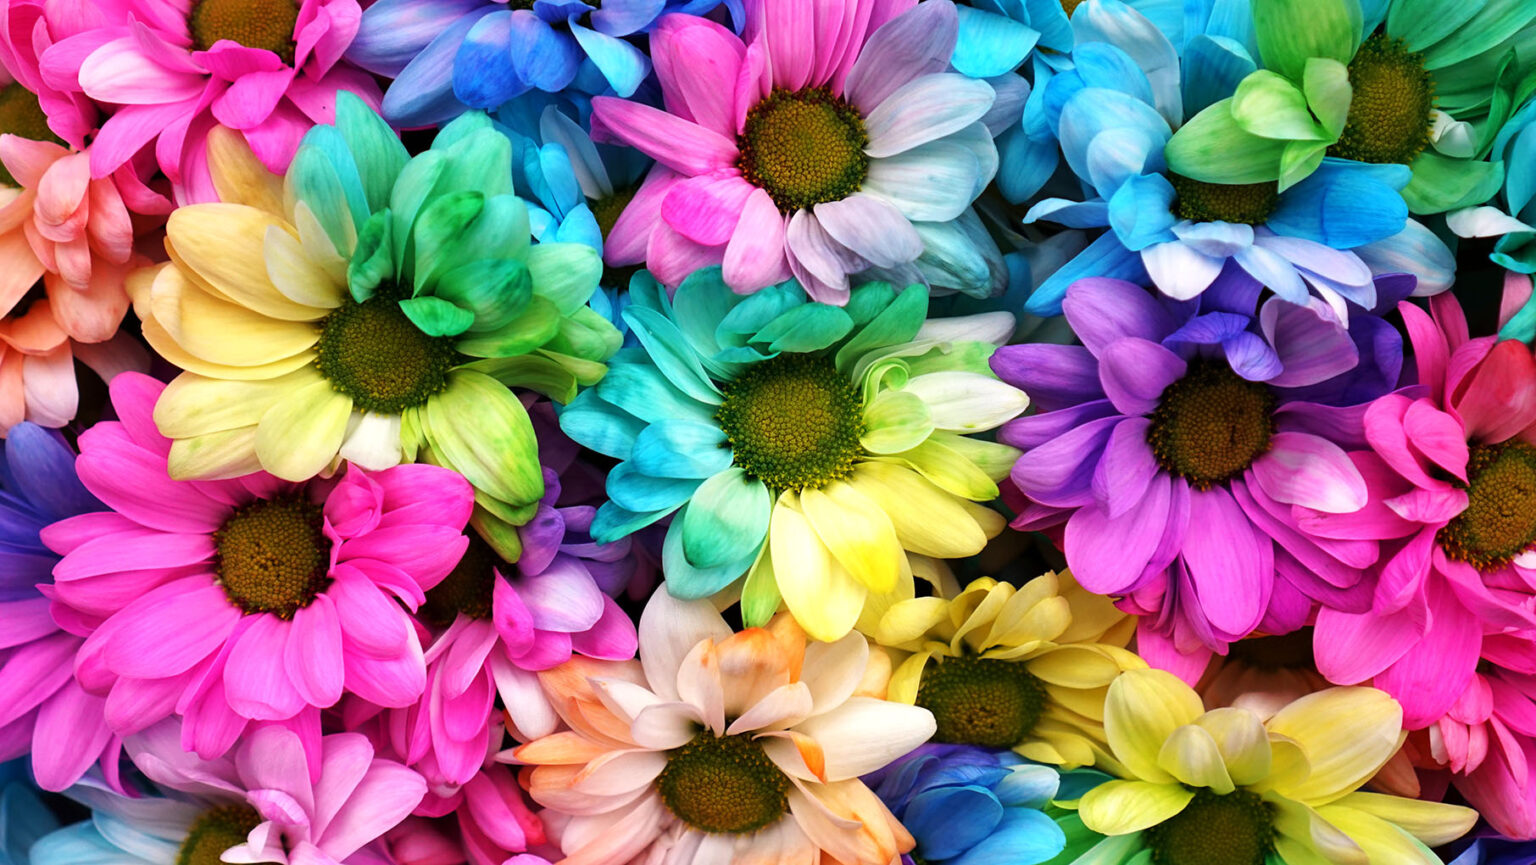 Multicolored Daisies Jigsaw Puzzle